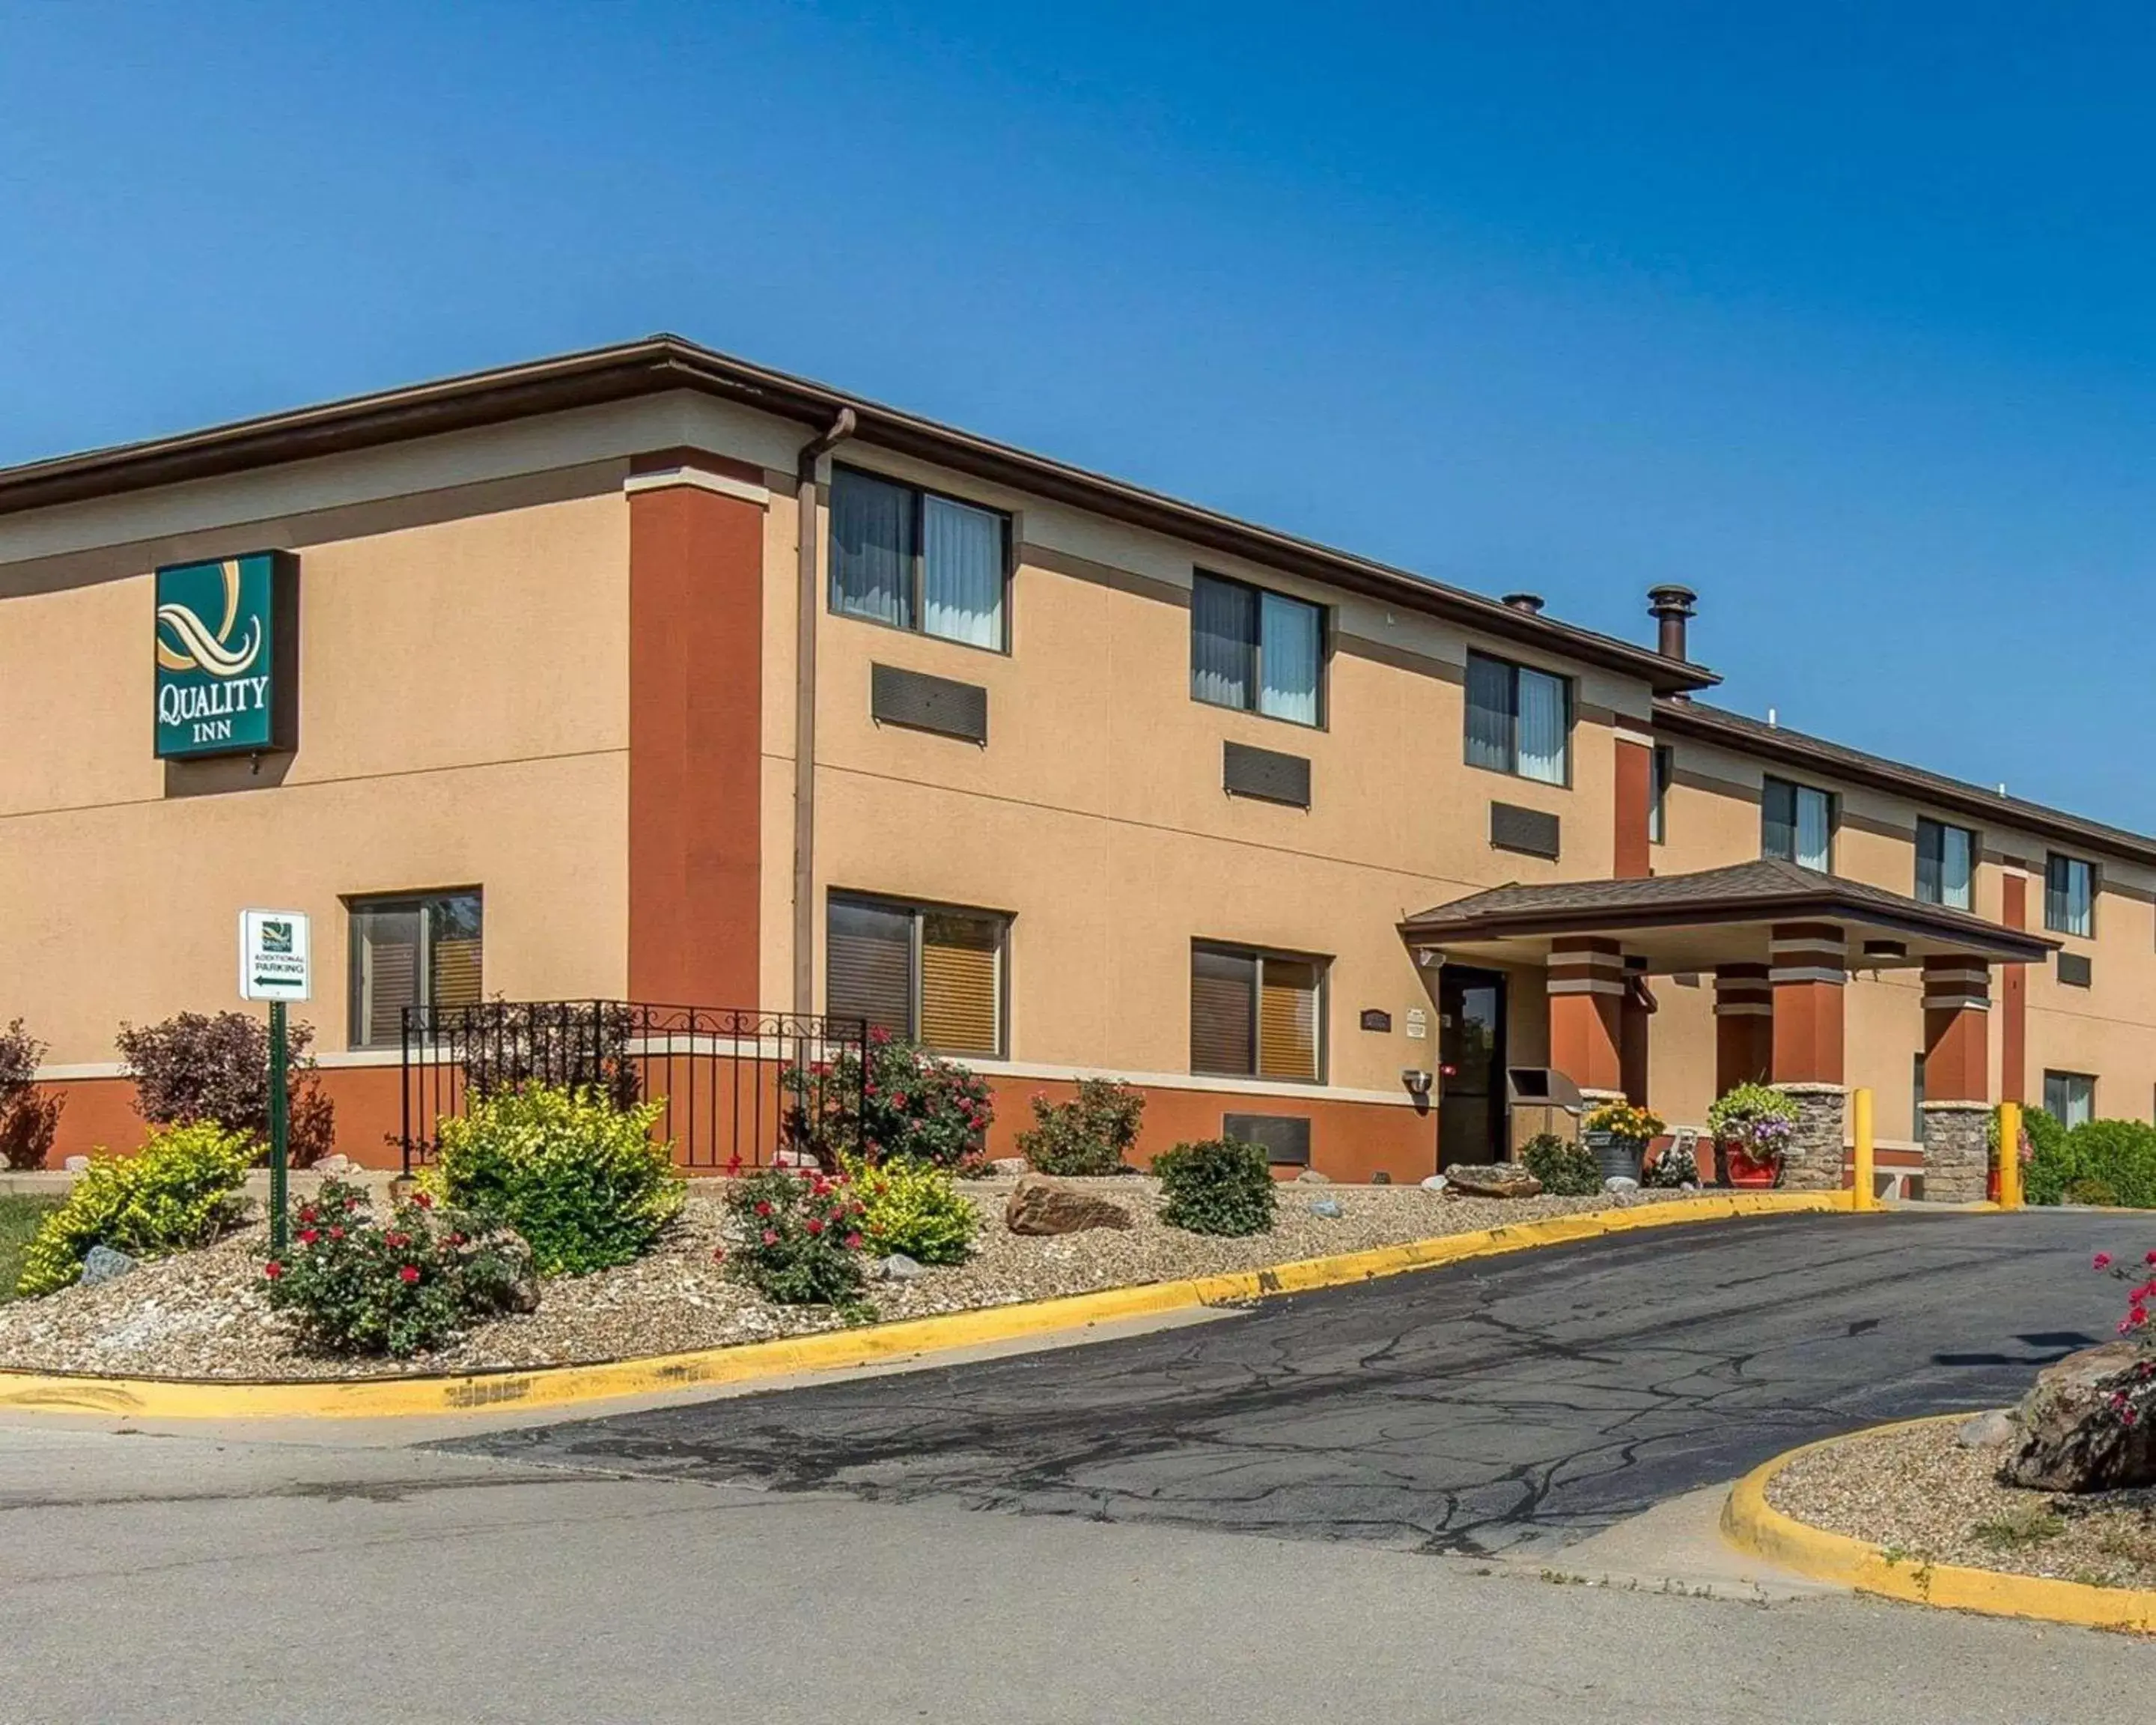 Property Building in Quality Inn at Collins Road - Cedar Rapids